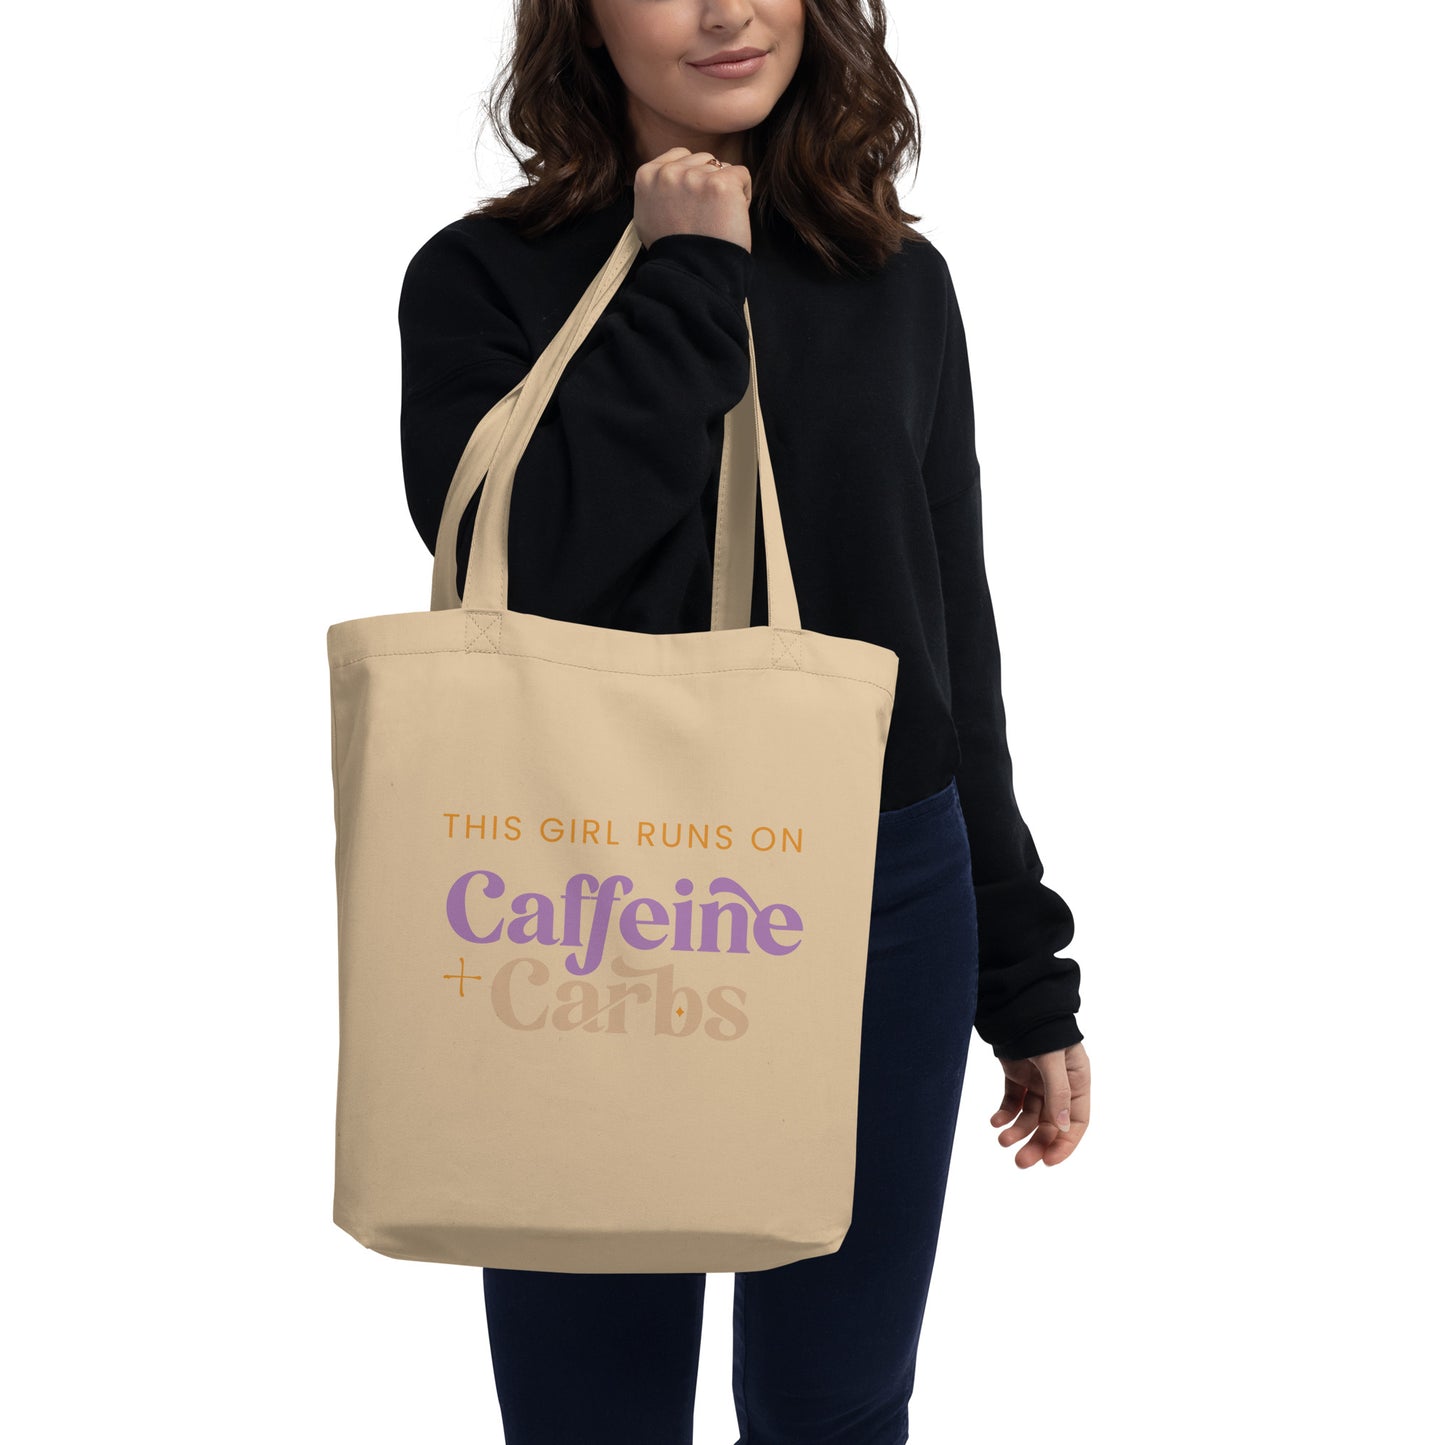 Woman holding a tan cotton tote bag that says "This girl runs on caffeine + carbs"